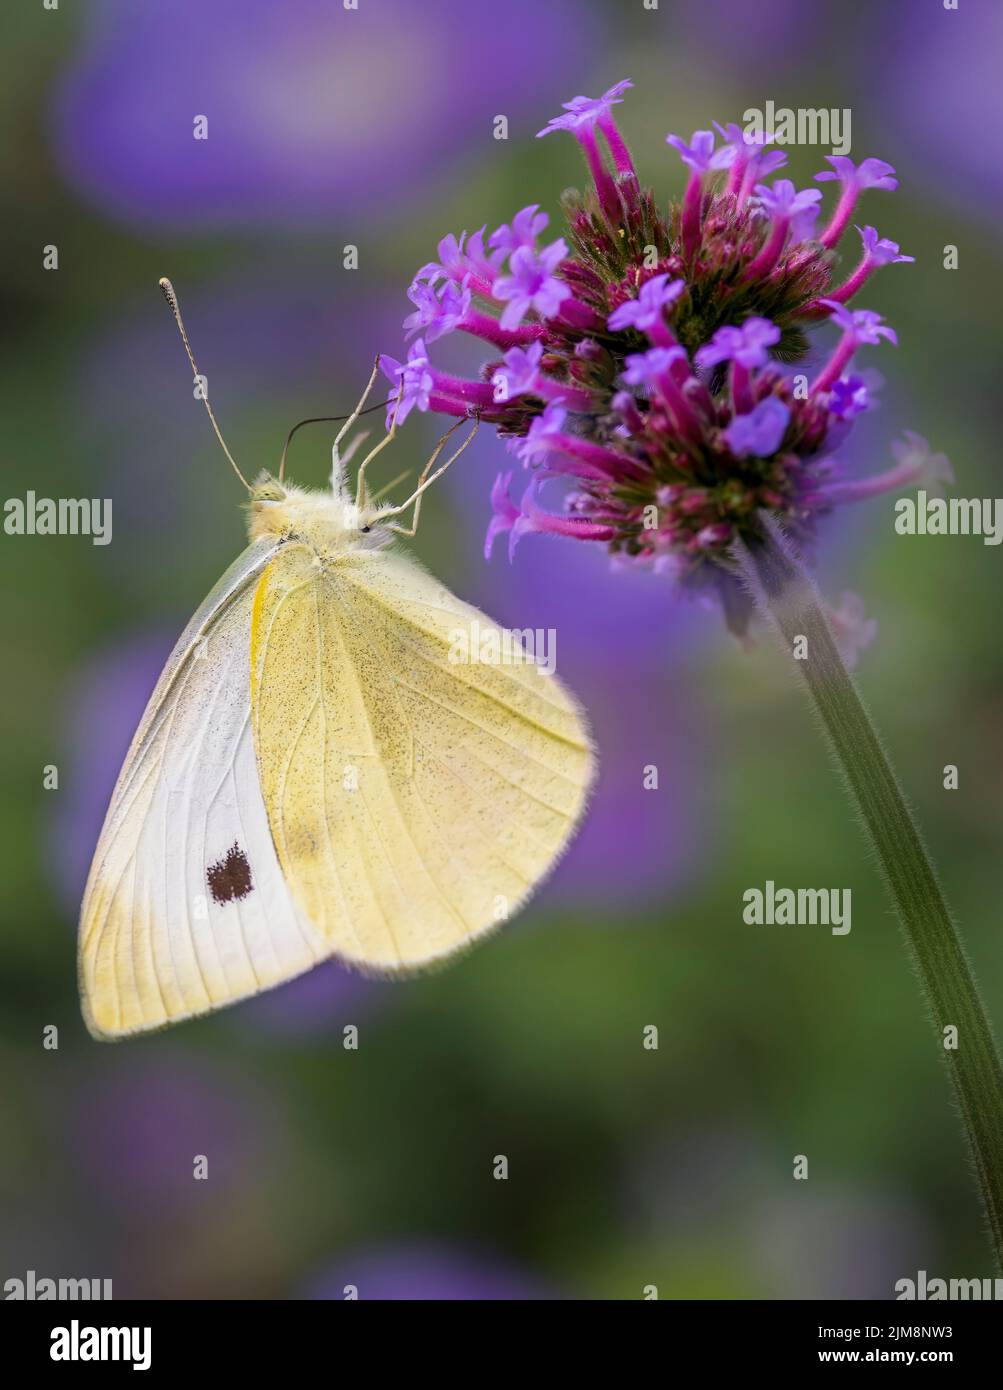 A beautiful Small White butterfly, (Pieris rapae), feeding from a Verbena flower, with out of focus purple flowers in the background Stock Photo